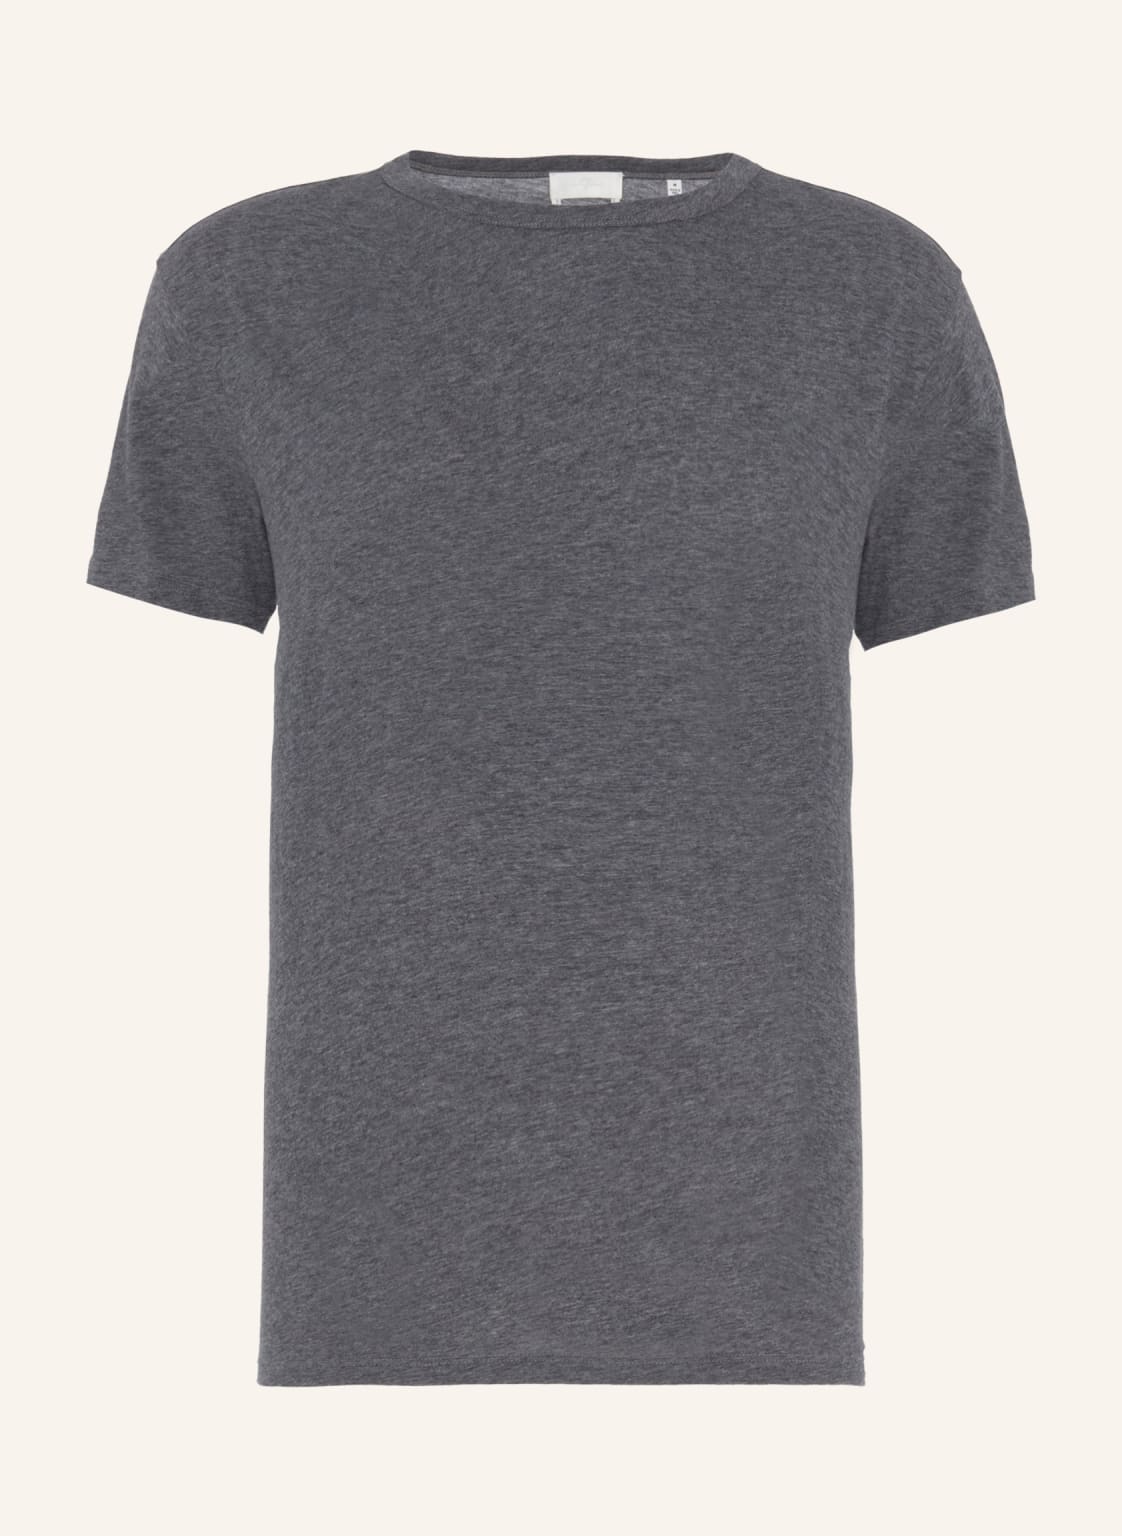 7 For All Mankind Featherweight T-Shirt grau von 7 For All Mankind